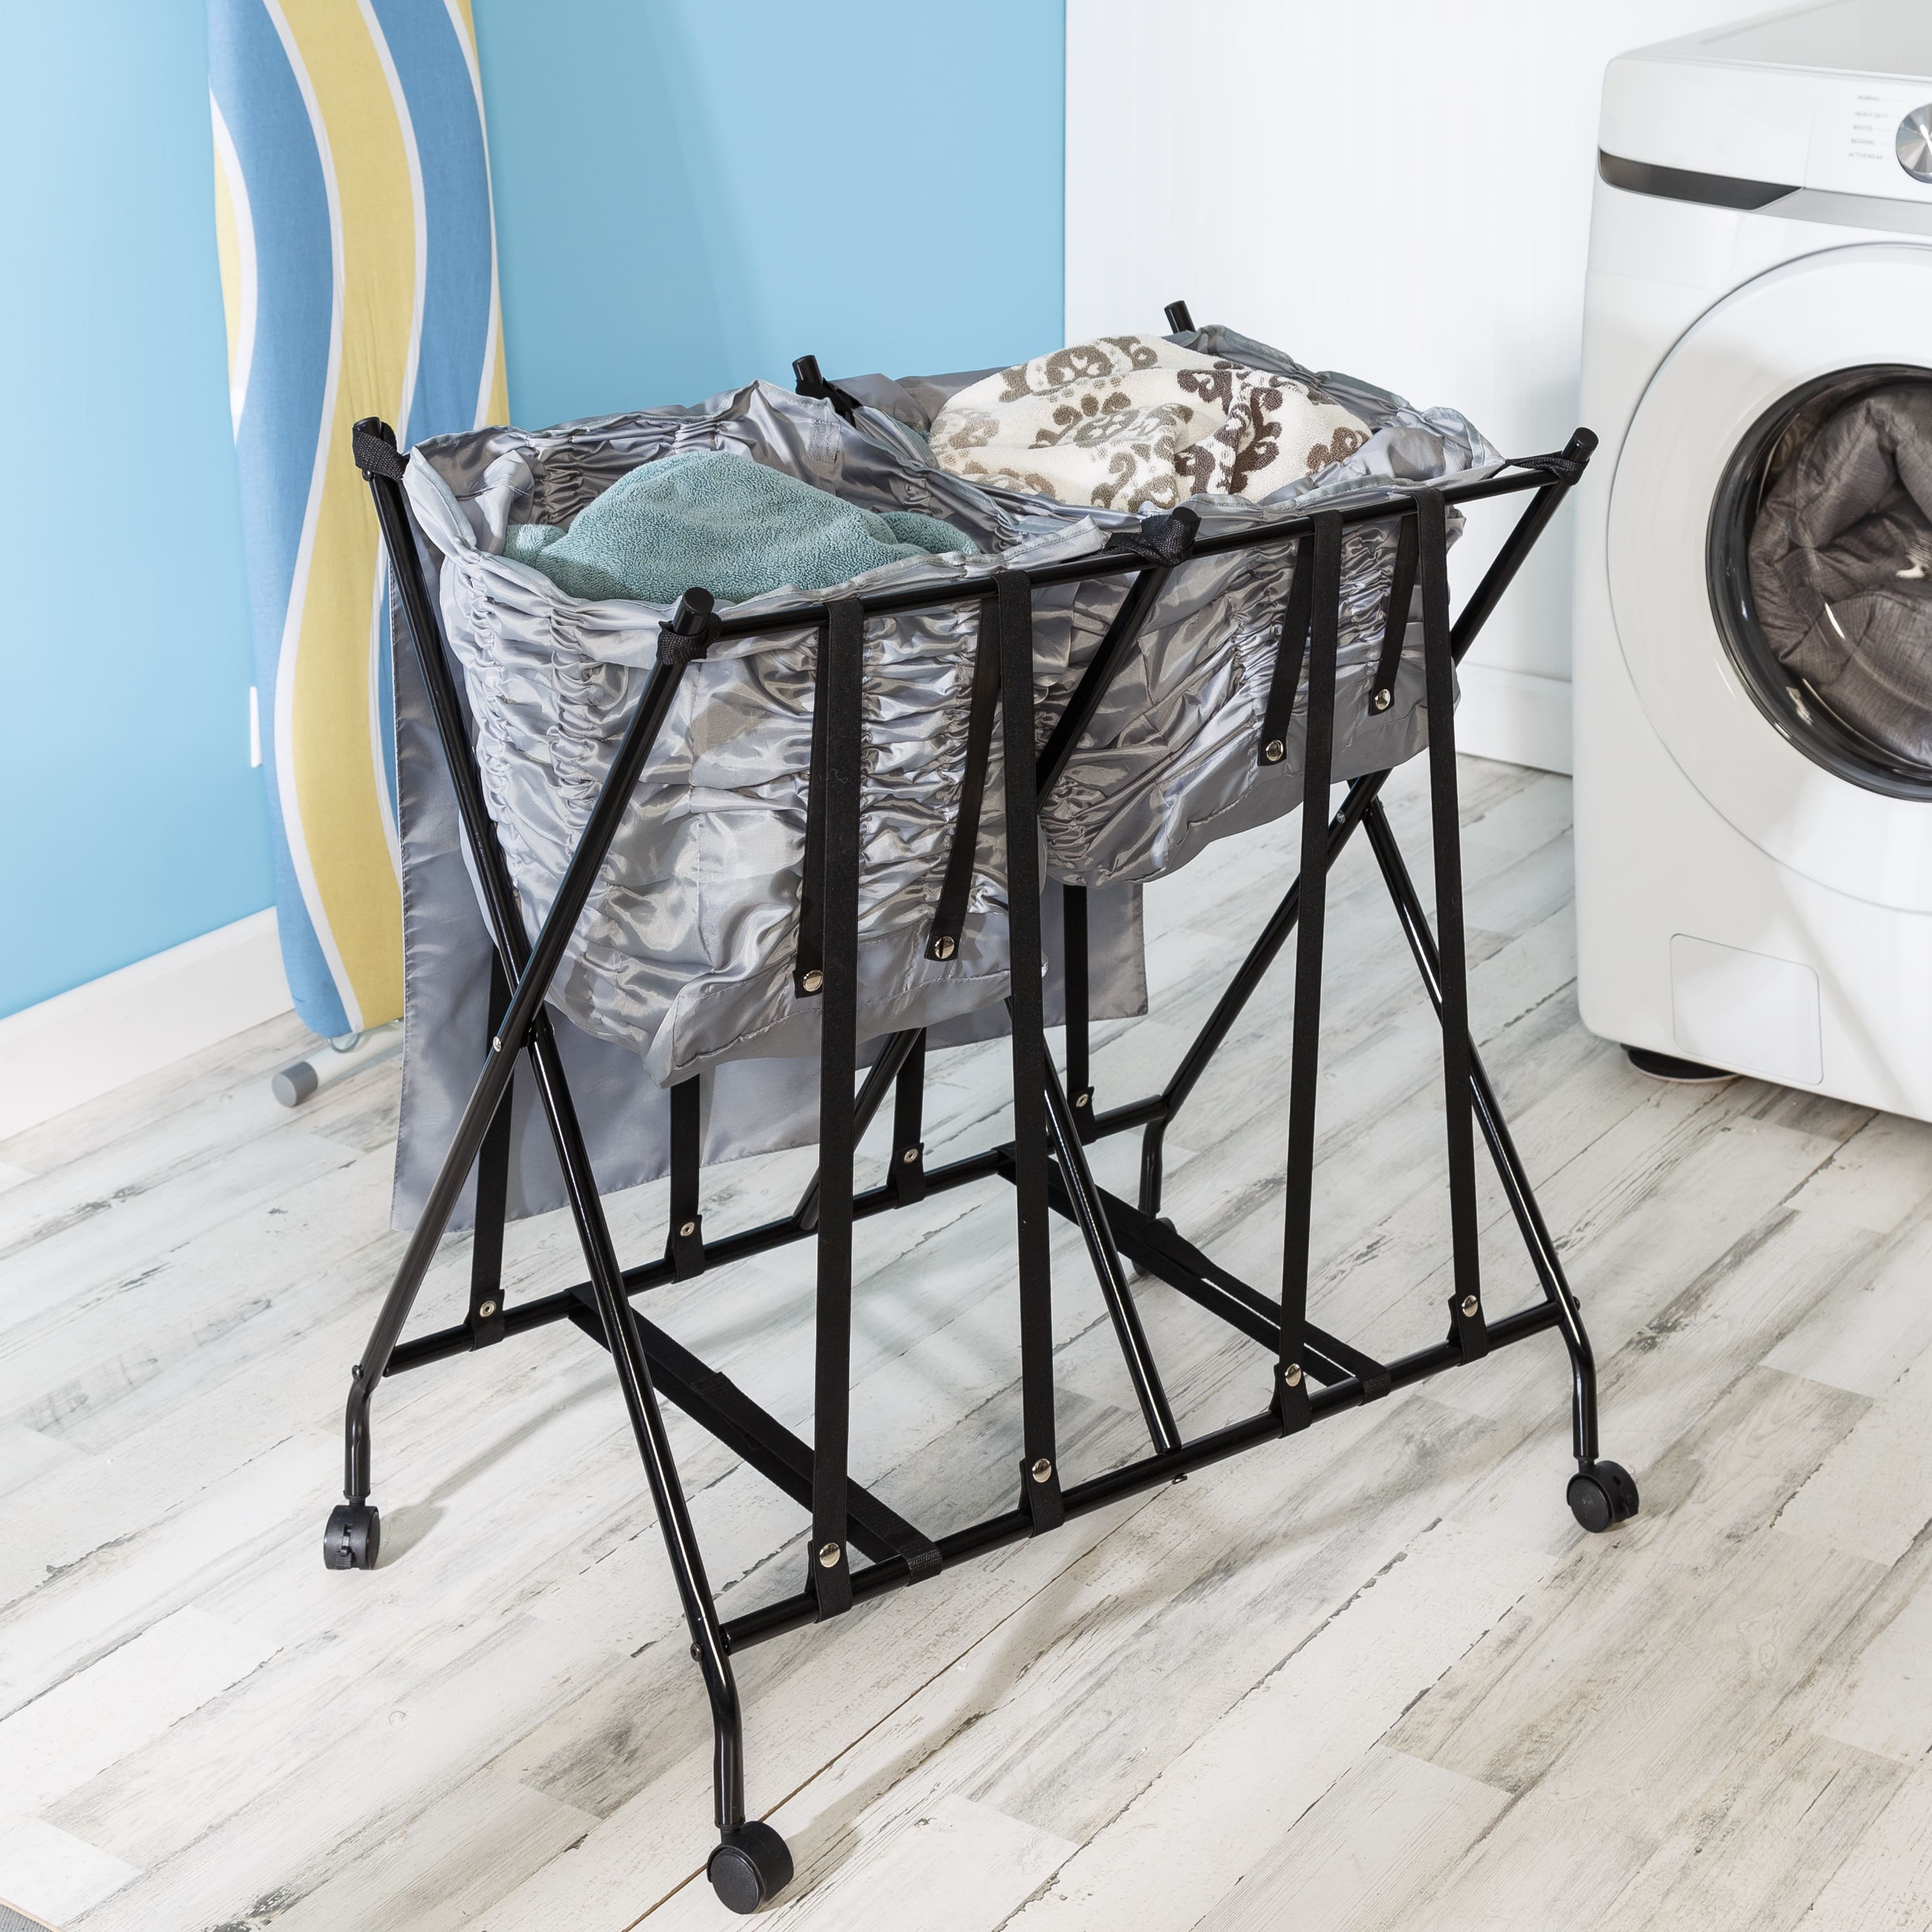 Honey Can Do Black/Gray Double Bounce Back Hamper with Wheels and Lid